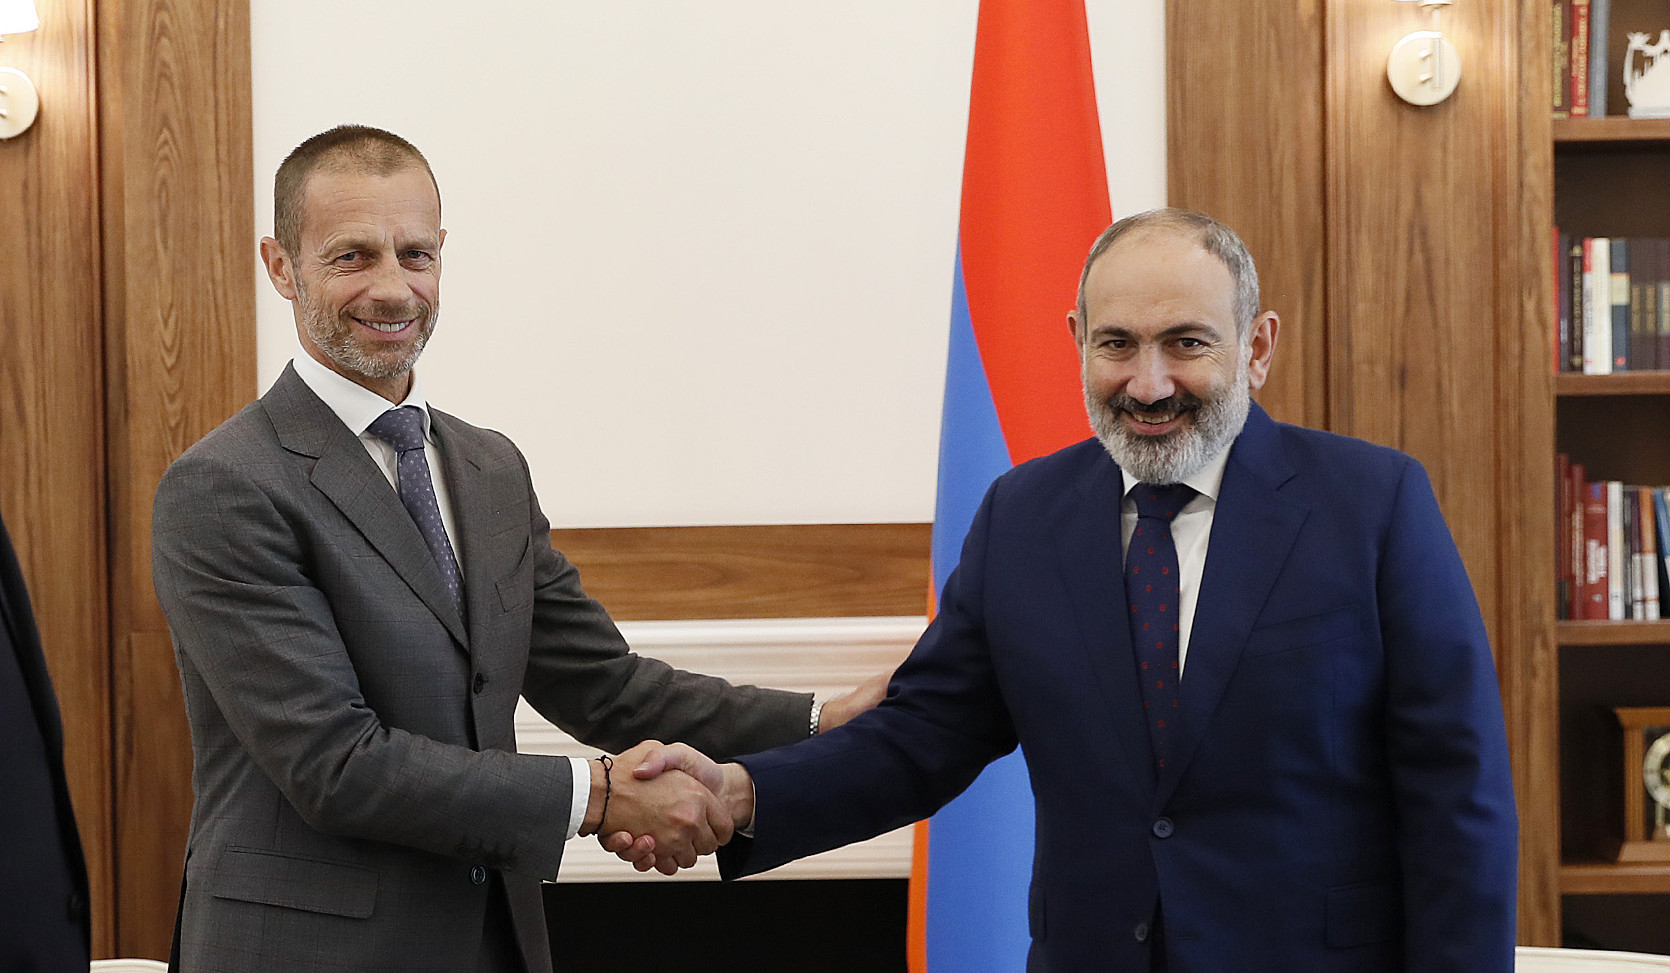 UEFA to continue supporting development of football in Armenia: President Čeferin to PM Pashinyan